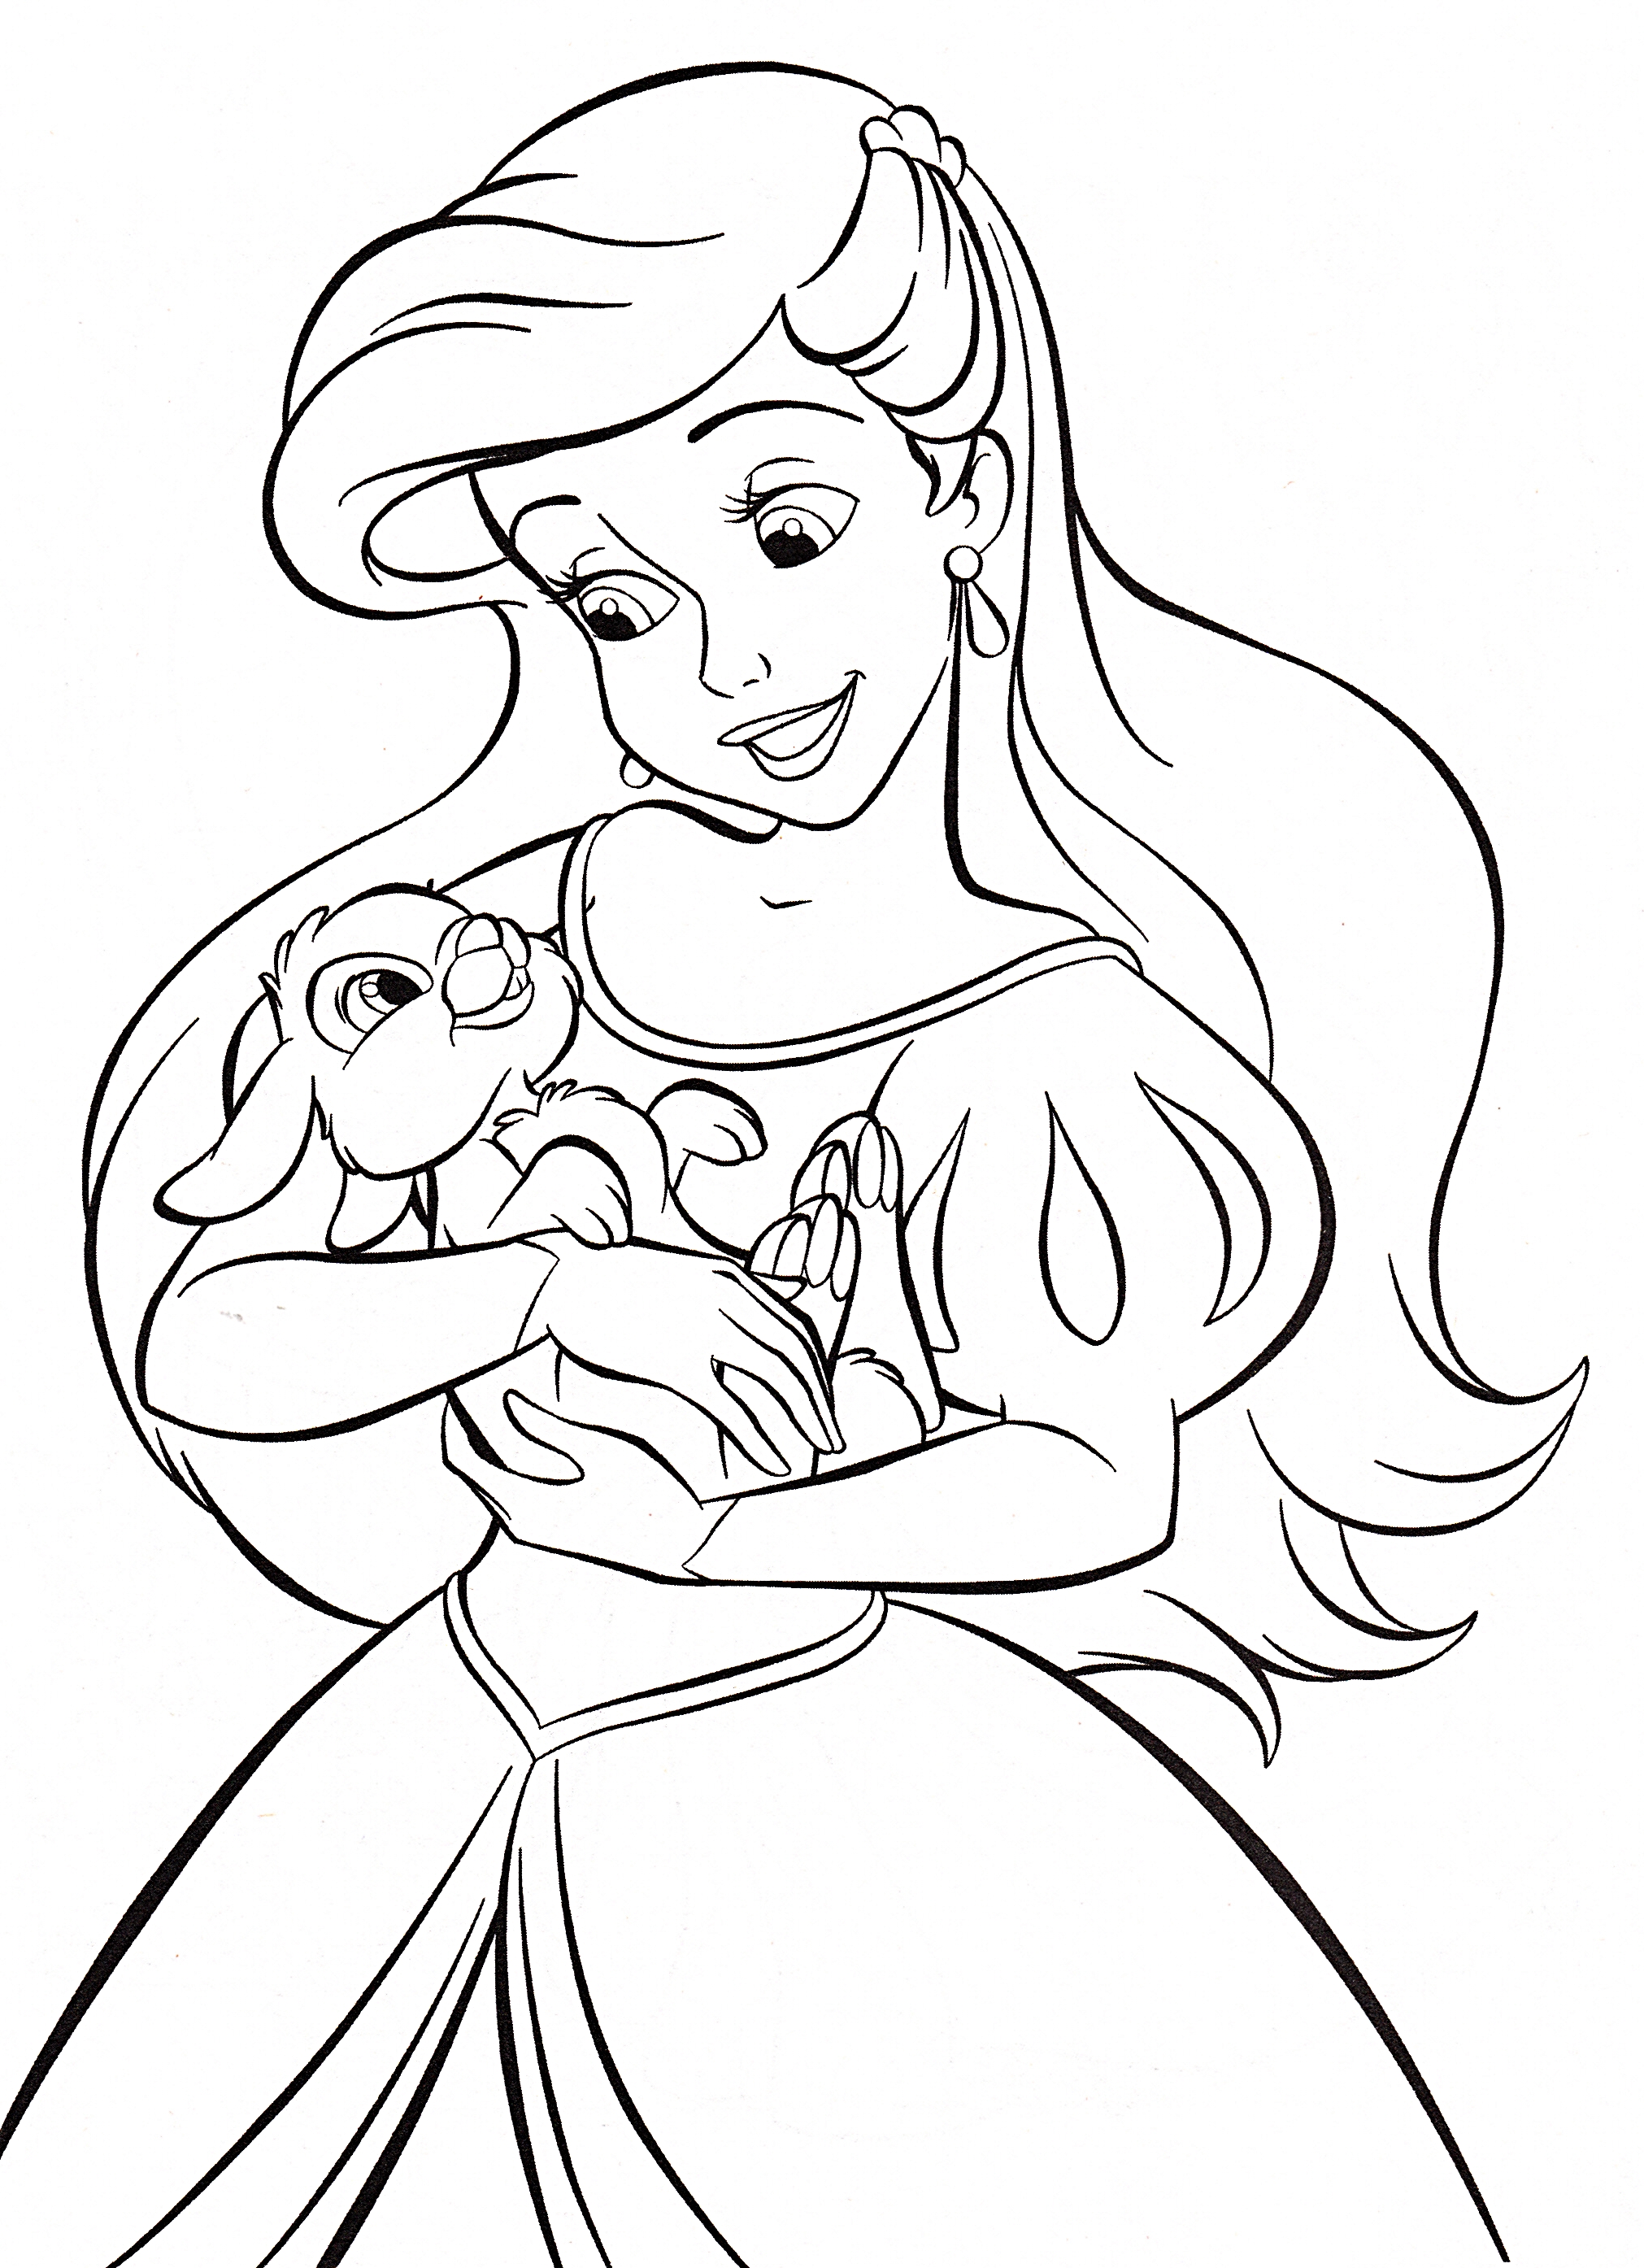 The Little Mermaid And A Rabbit coloring page